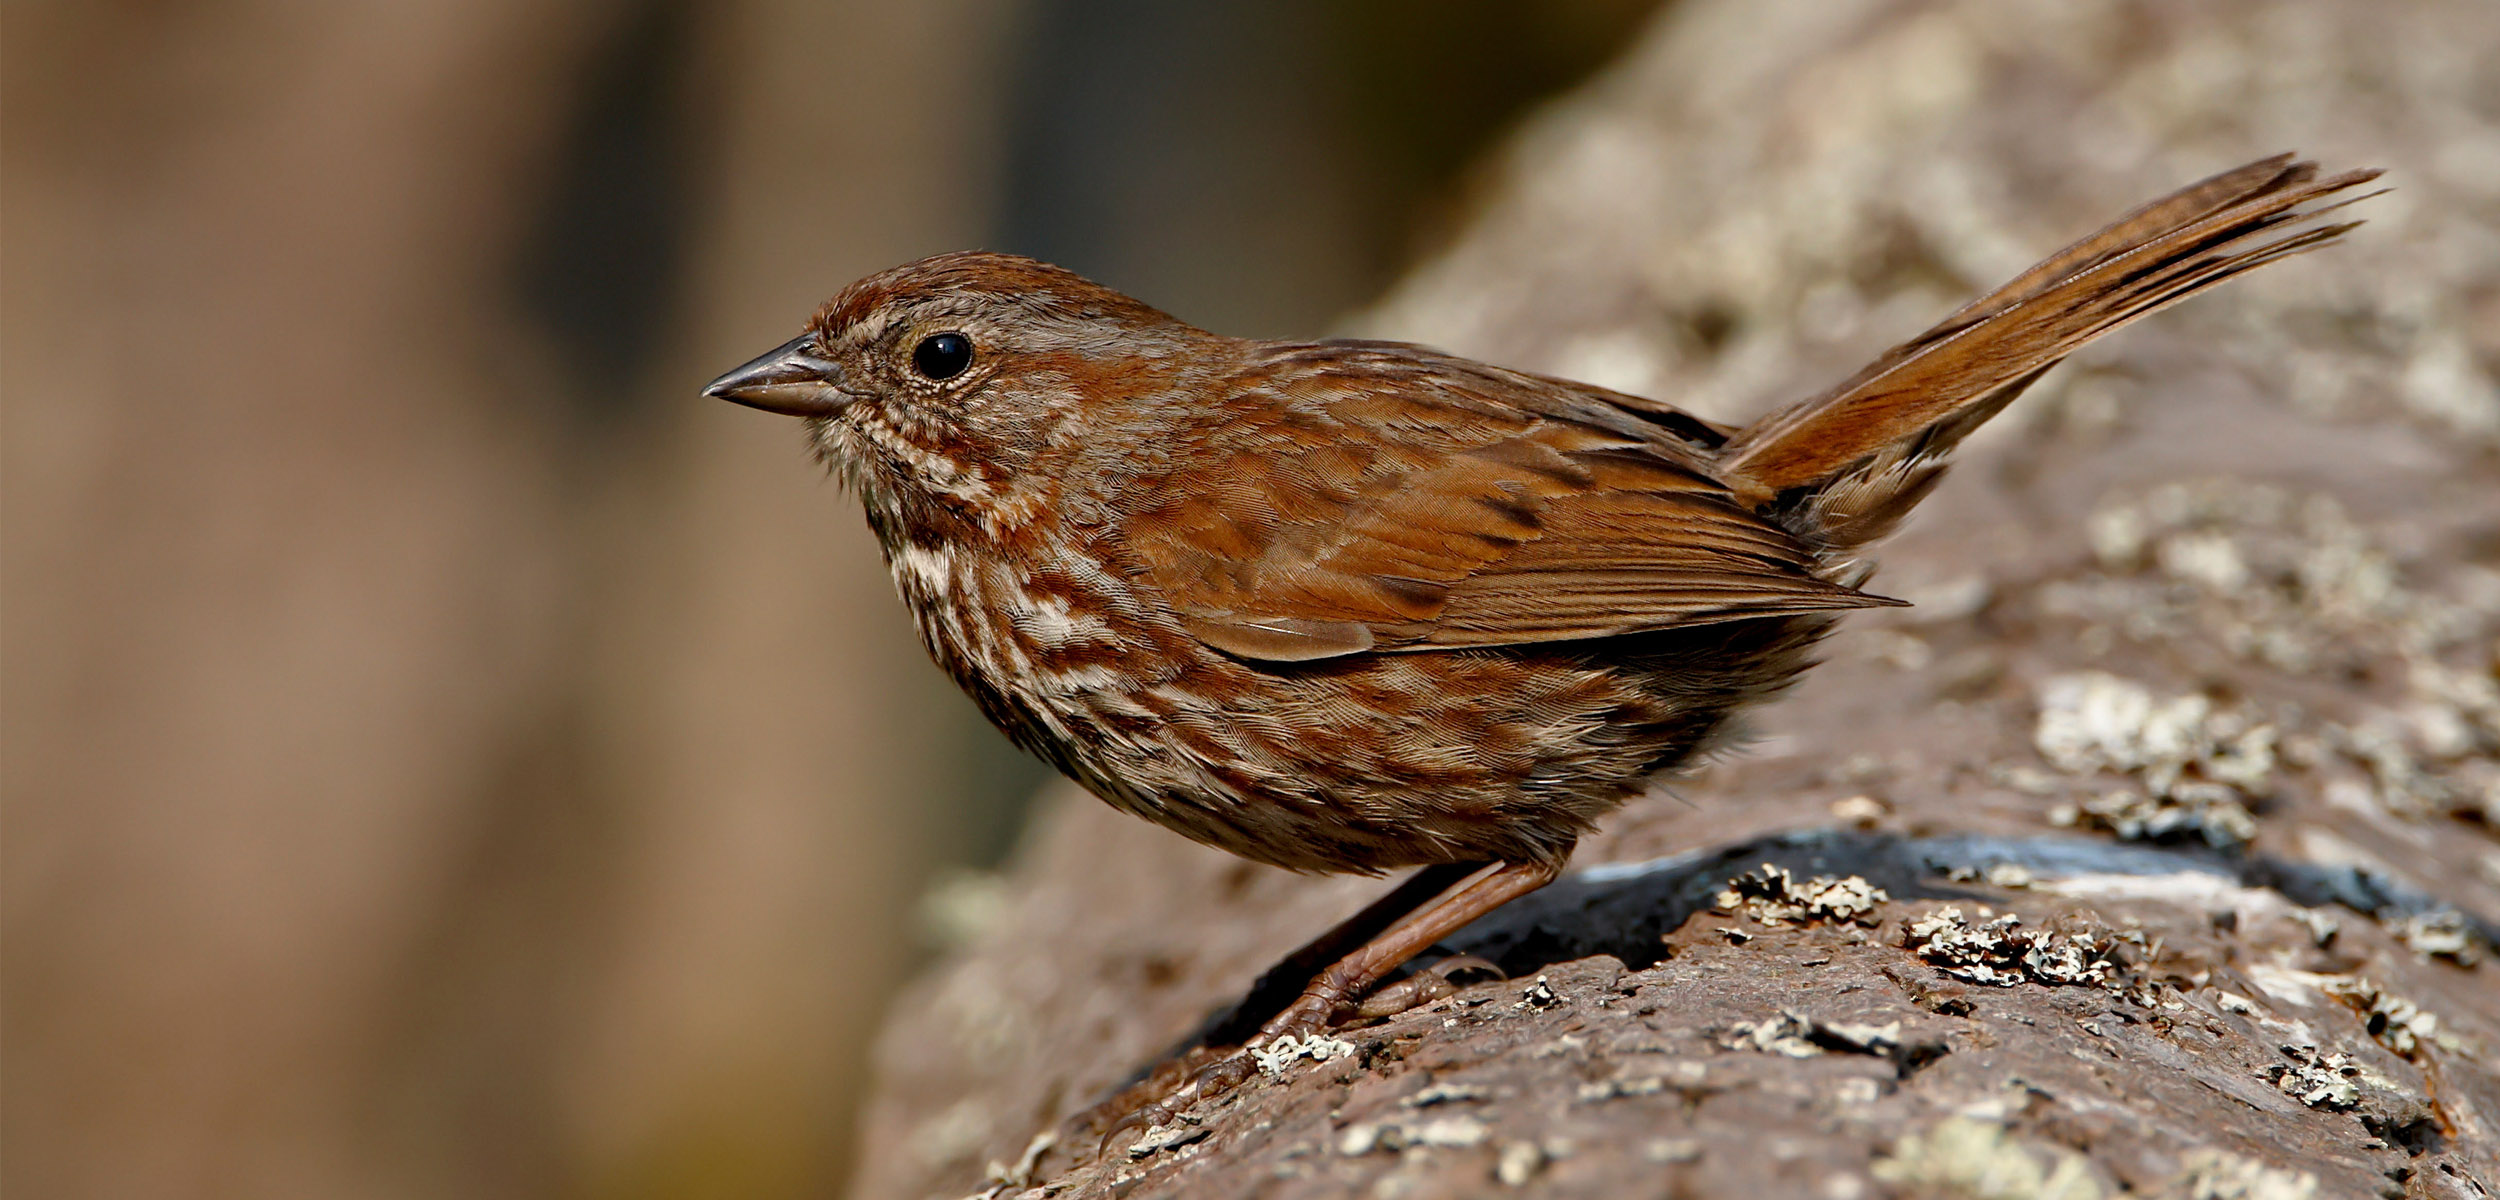 A plump warm brown sparrow sits atop a rock covered in moss facing towards the left of the screen